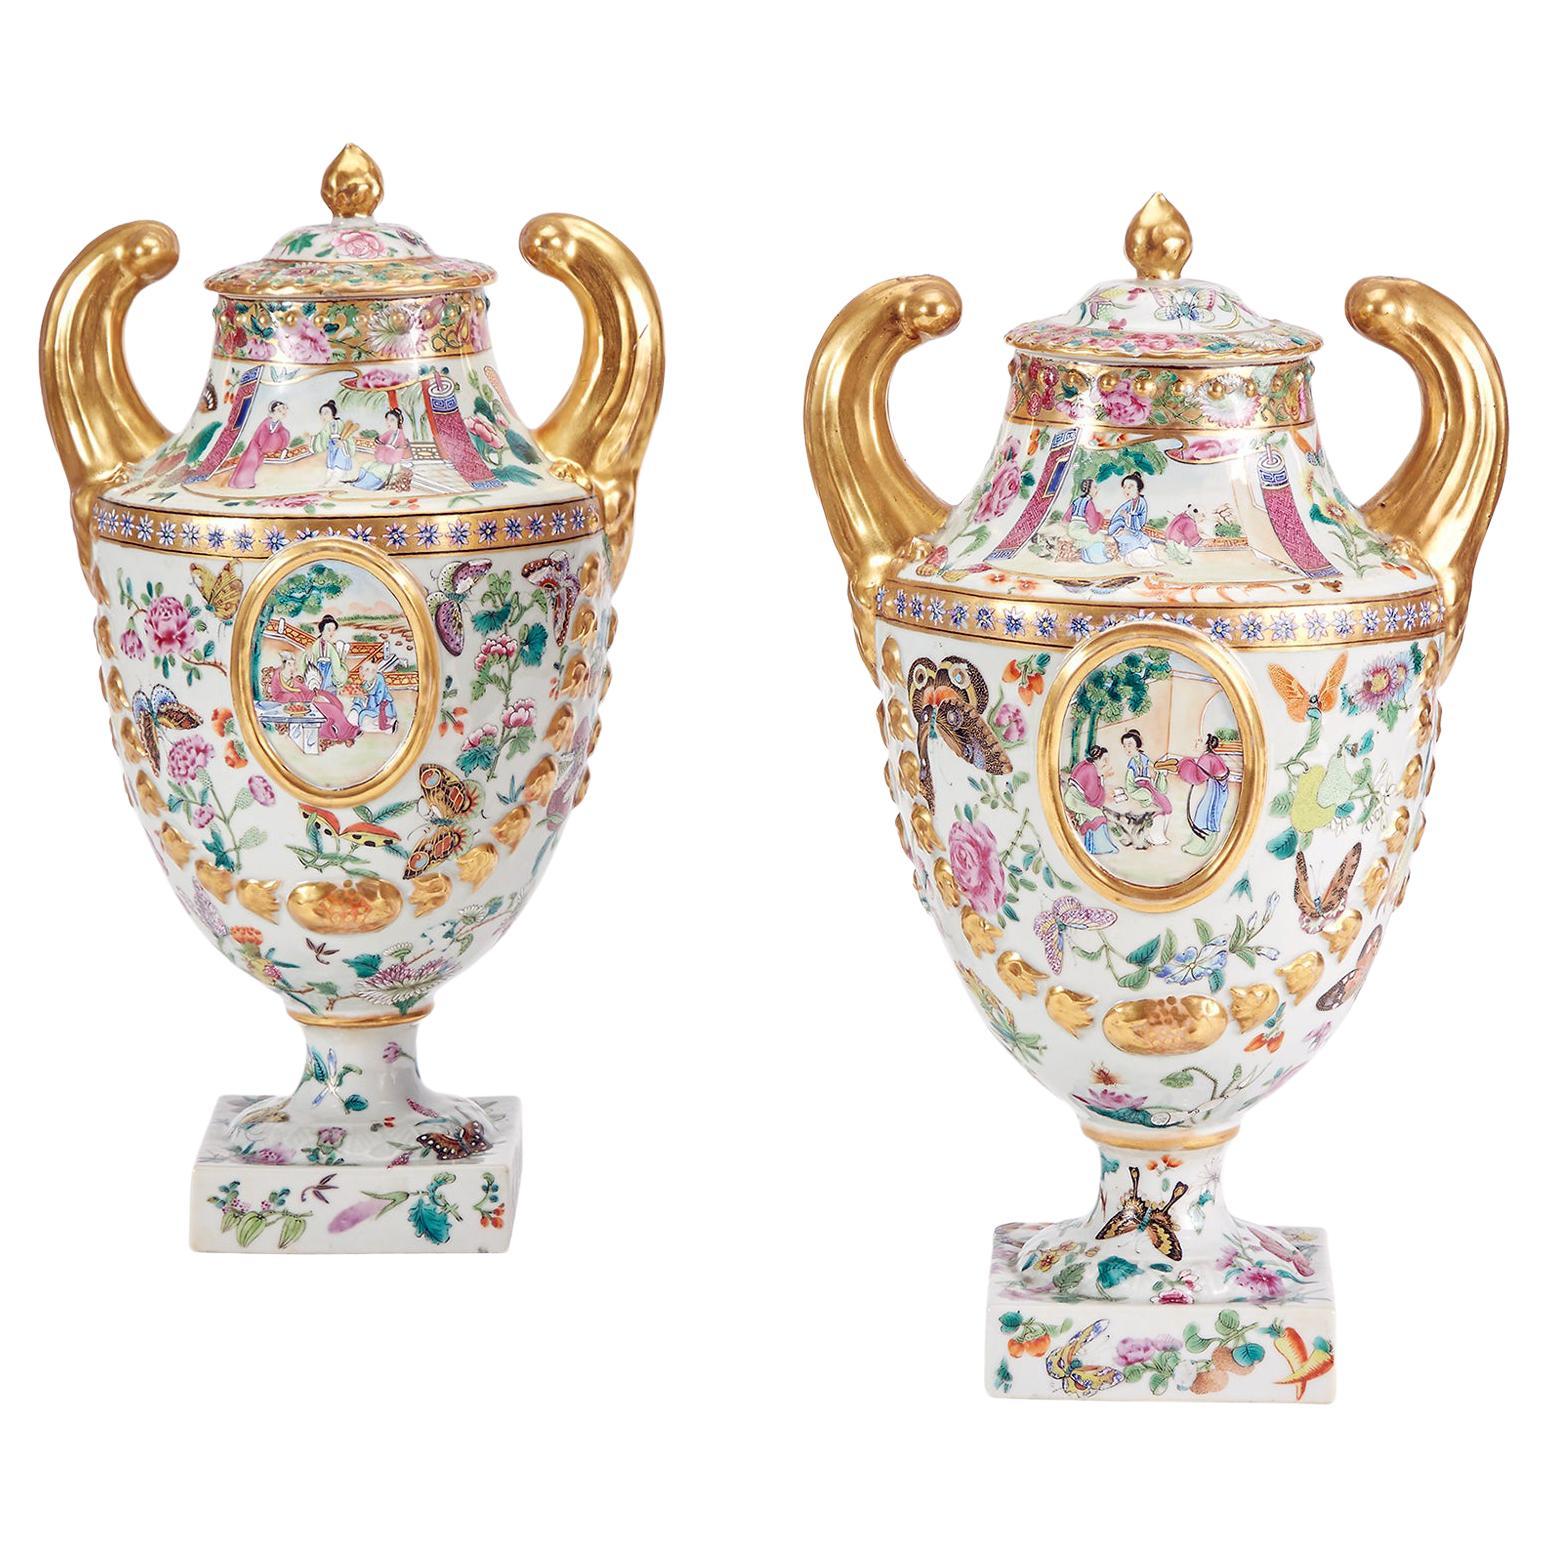 Chinese Export Porcelain Rose Mandarin Pistol-Handled Urns and Covers